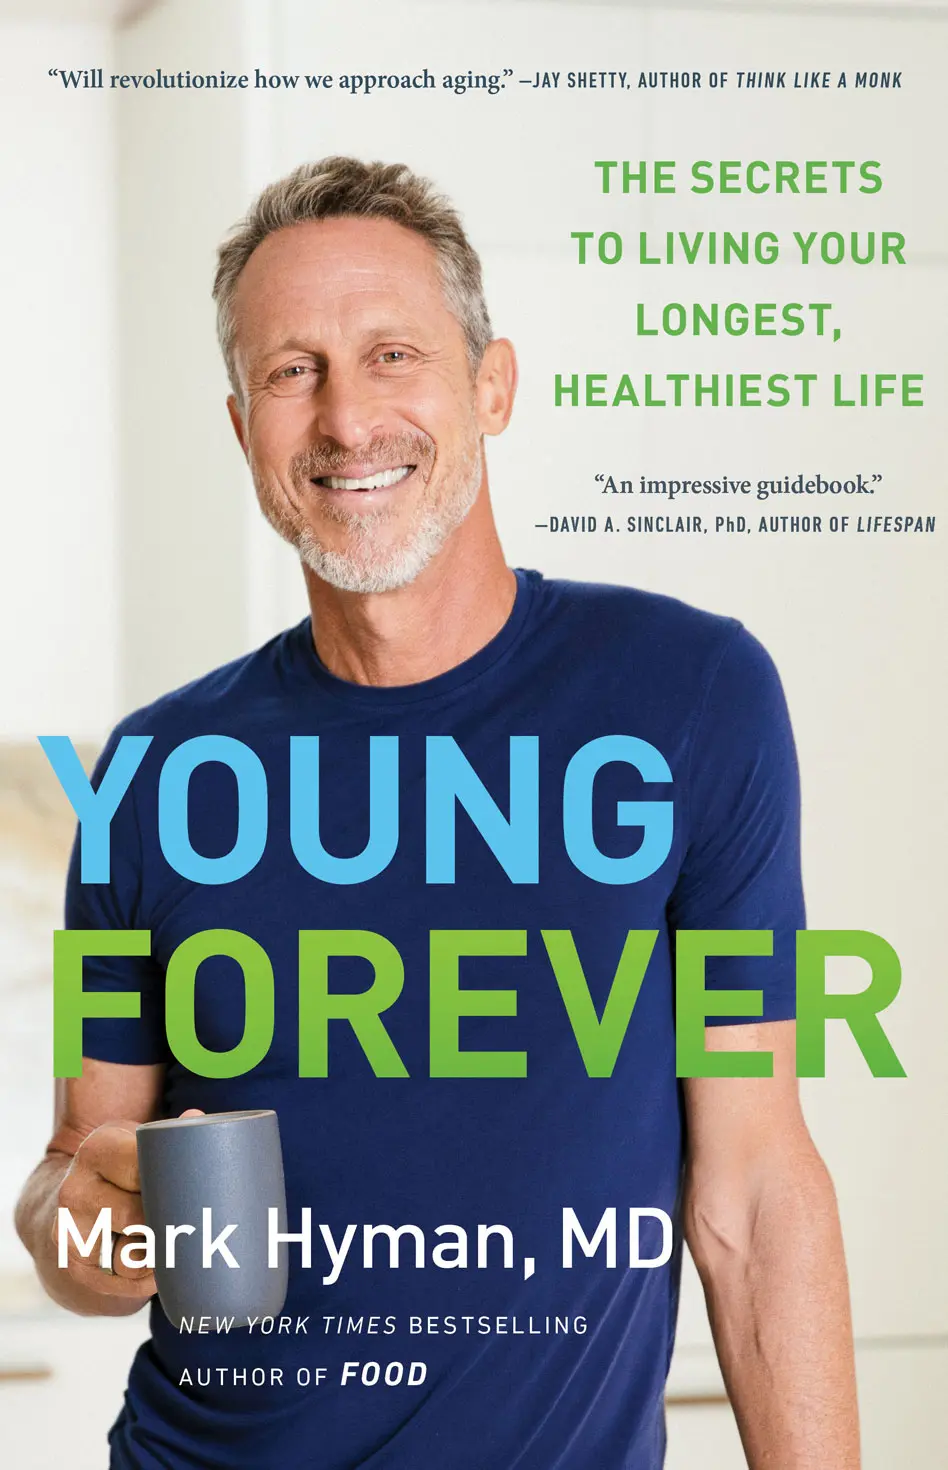 young forever book by Dr. Hyman